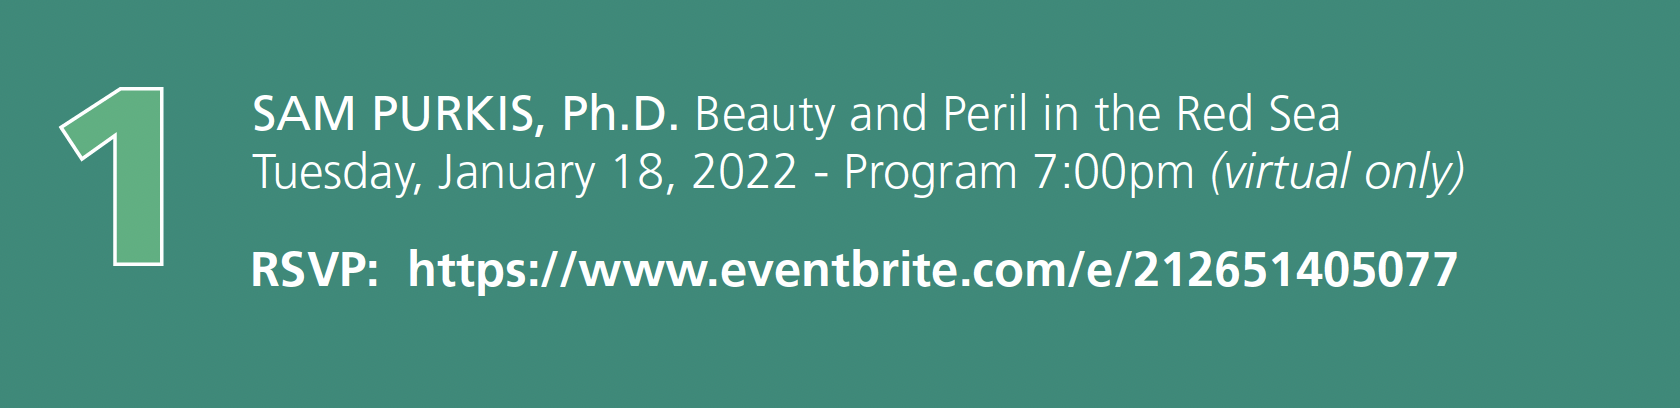 Number 1. Sam Purkis, Ph.D. Lecture title: Beauty and Peril in the Red Sea. Tuesday, January 18, 2022 - Program 7:00pm (virtual only) RSVP: event registration link embedded in image